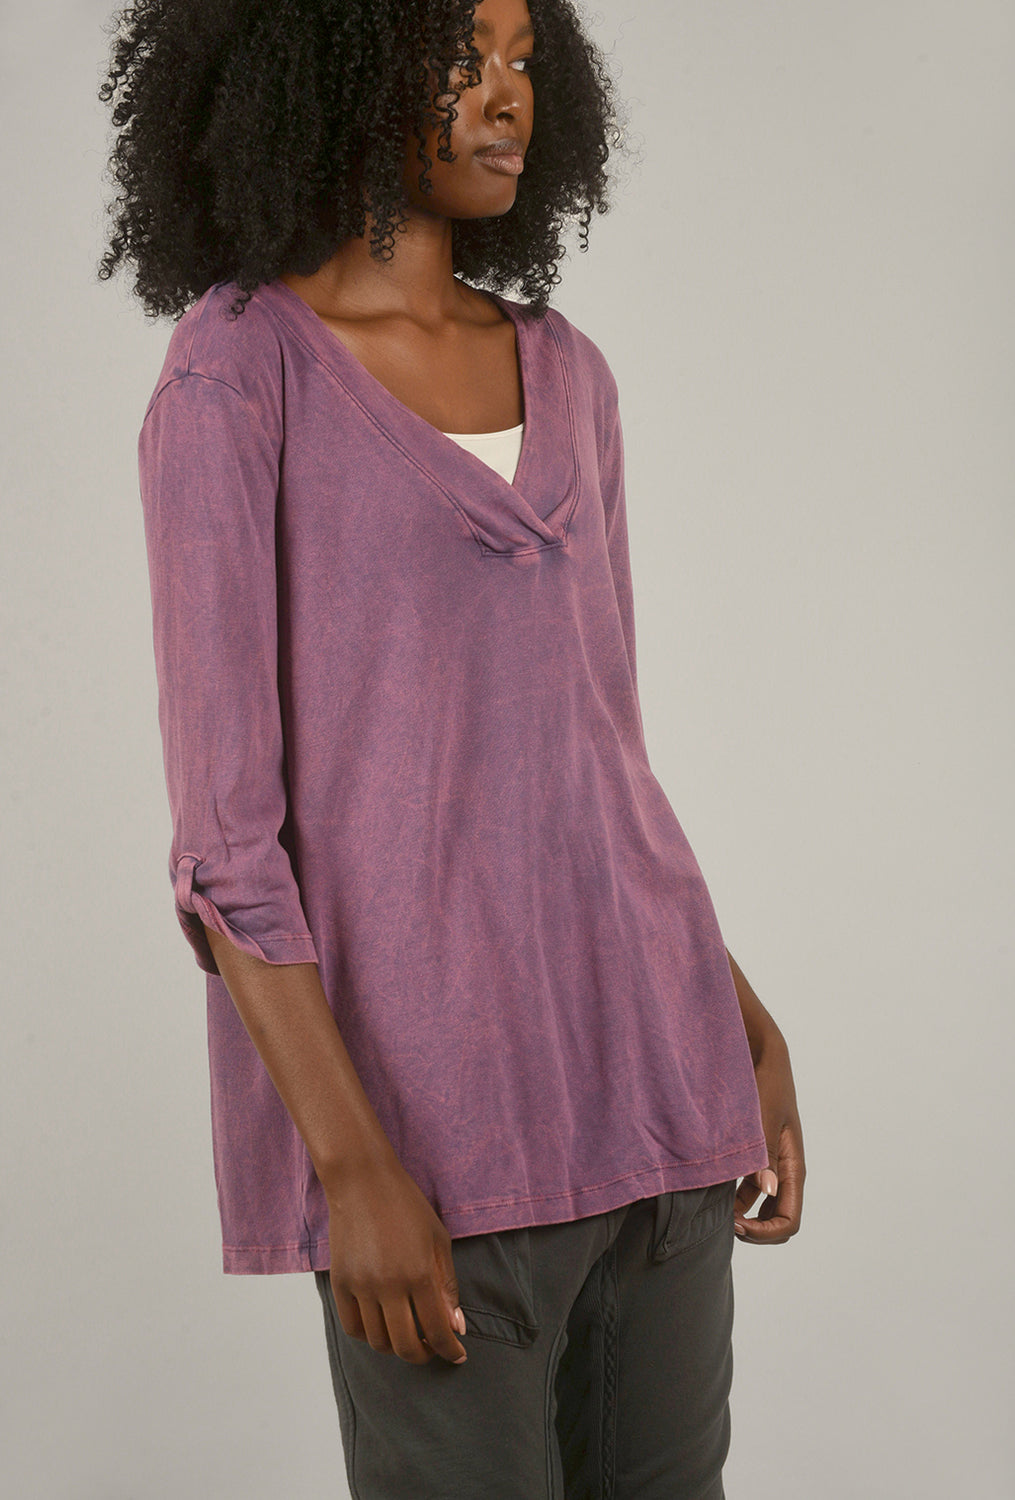 Mineral-Wash 3/4-Sleeve Tunic, Lilac